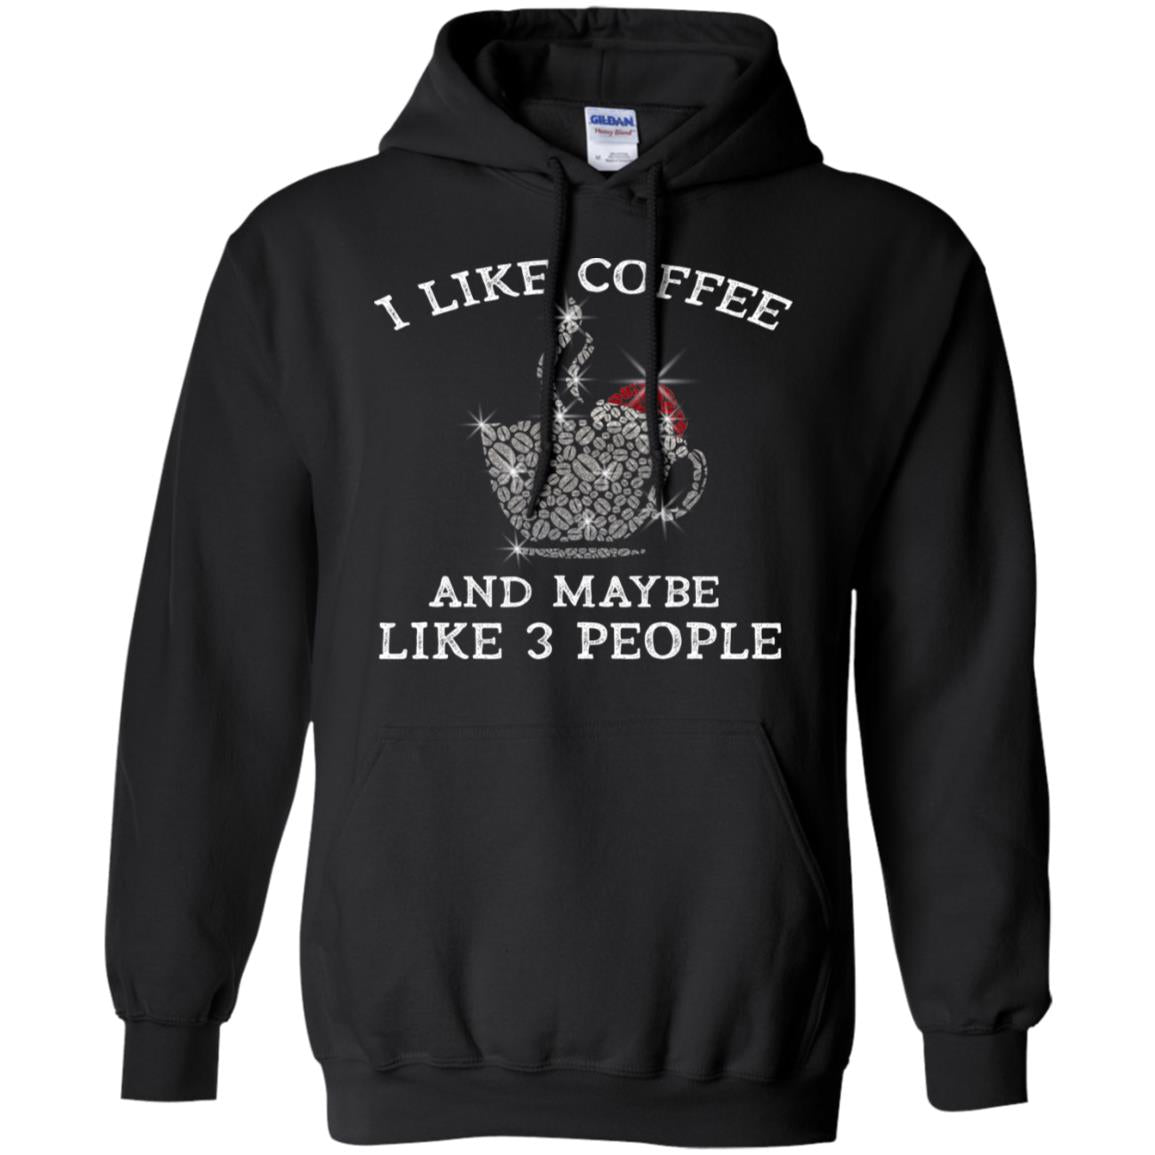 I Like Coffee And Maybe Like 3 People Best Quote Tshirt For Coffee LoversG185 Gildan Pullover Hoodie 8 oz.